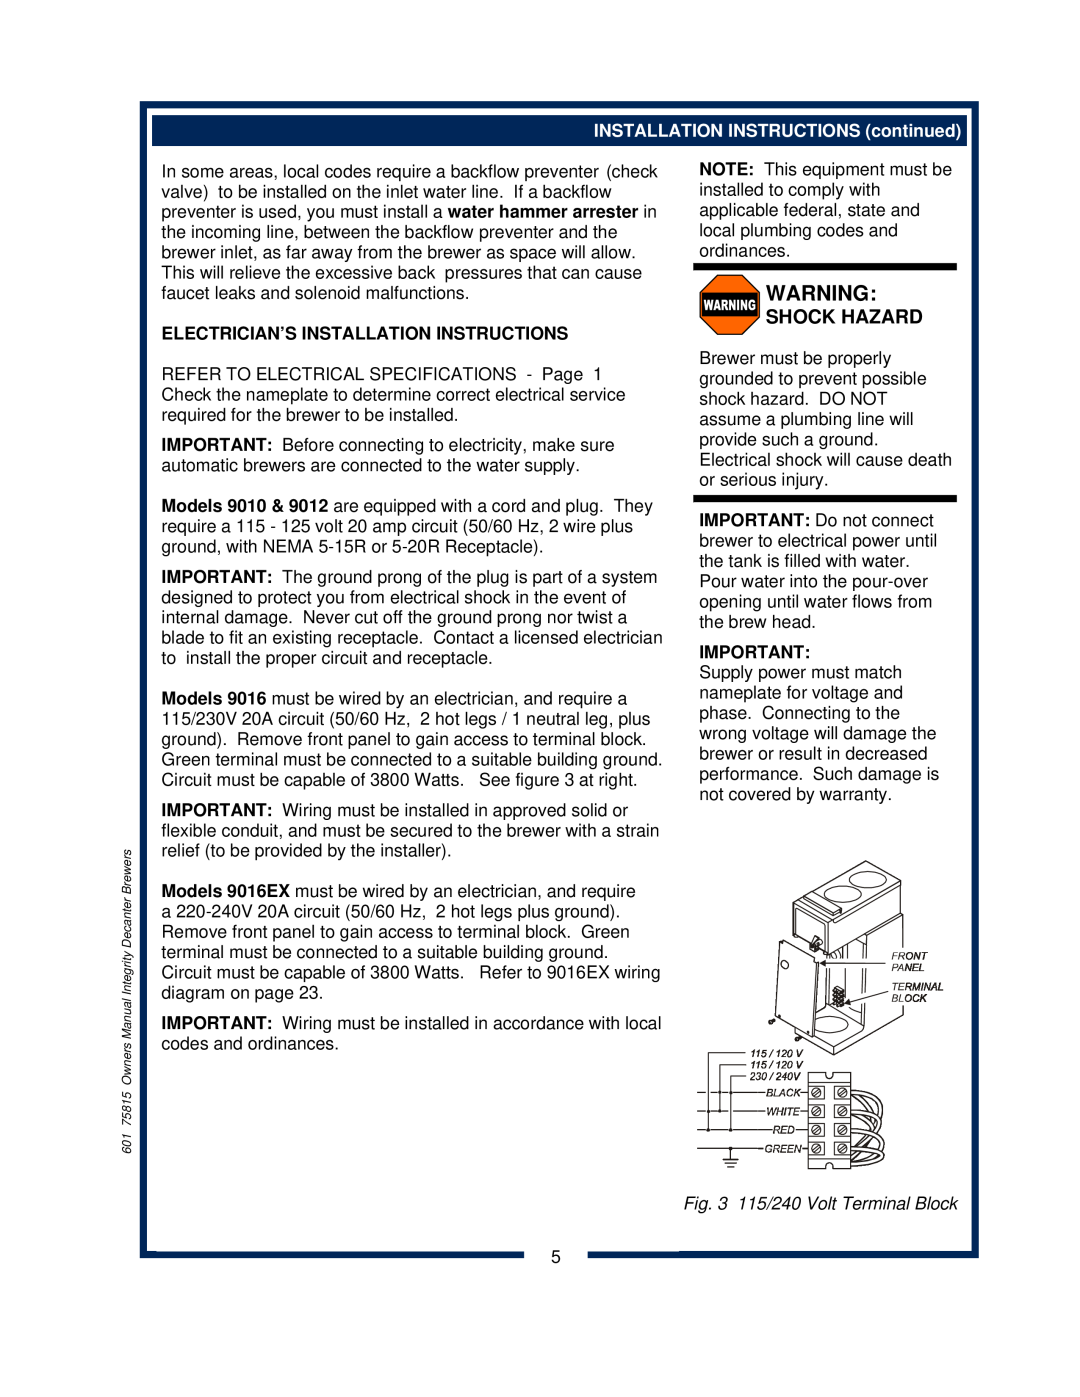 Bloomfield 9016, 9010, 9012 Shock Hazard, INSTALLATION INSTRUCTIONS continued, Electrician’S Installation Instructions 